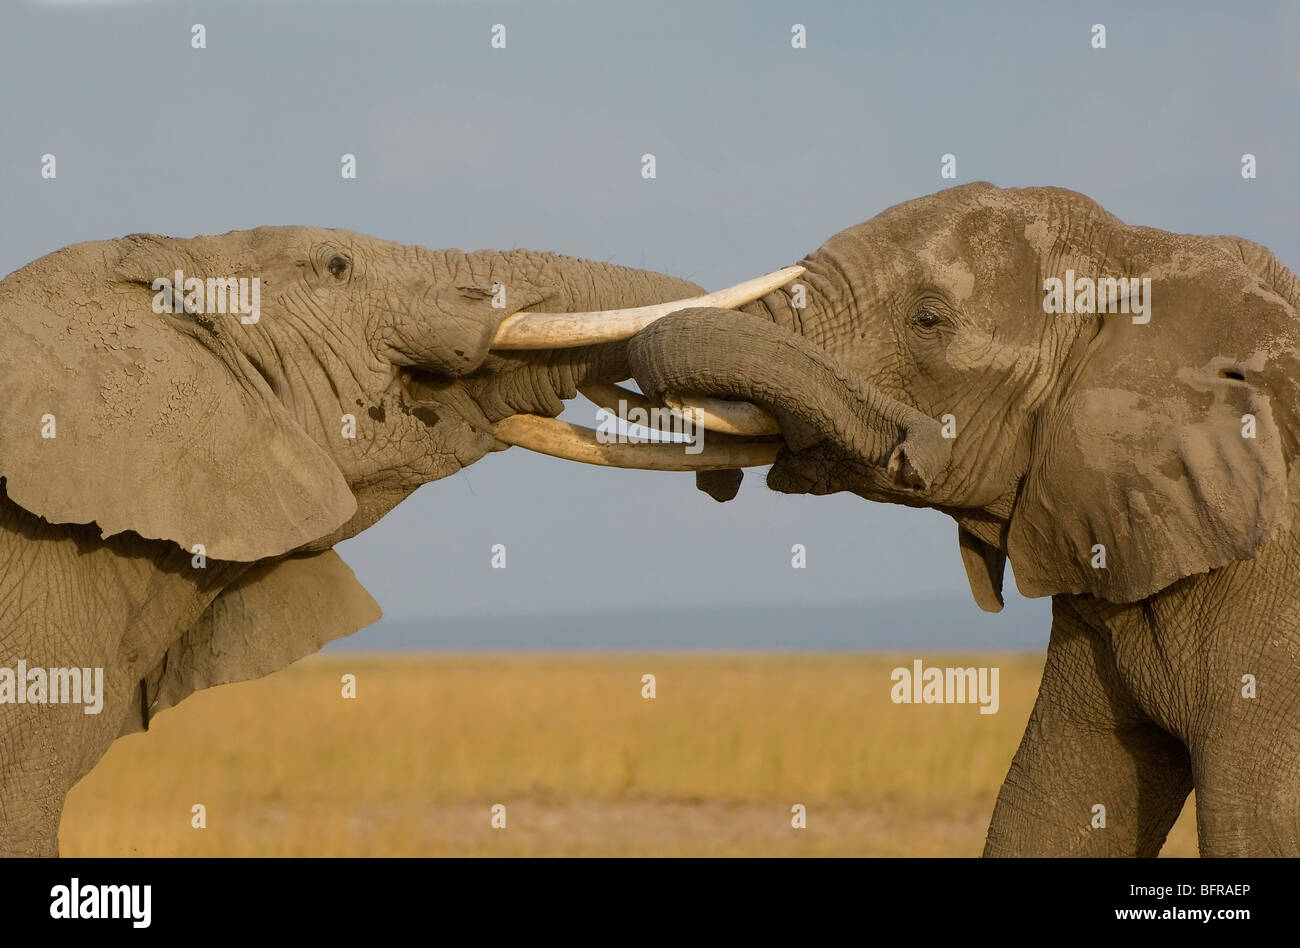 Two bull elephants push and shove with their trunks in a sparring match. Stock Photo